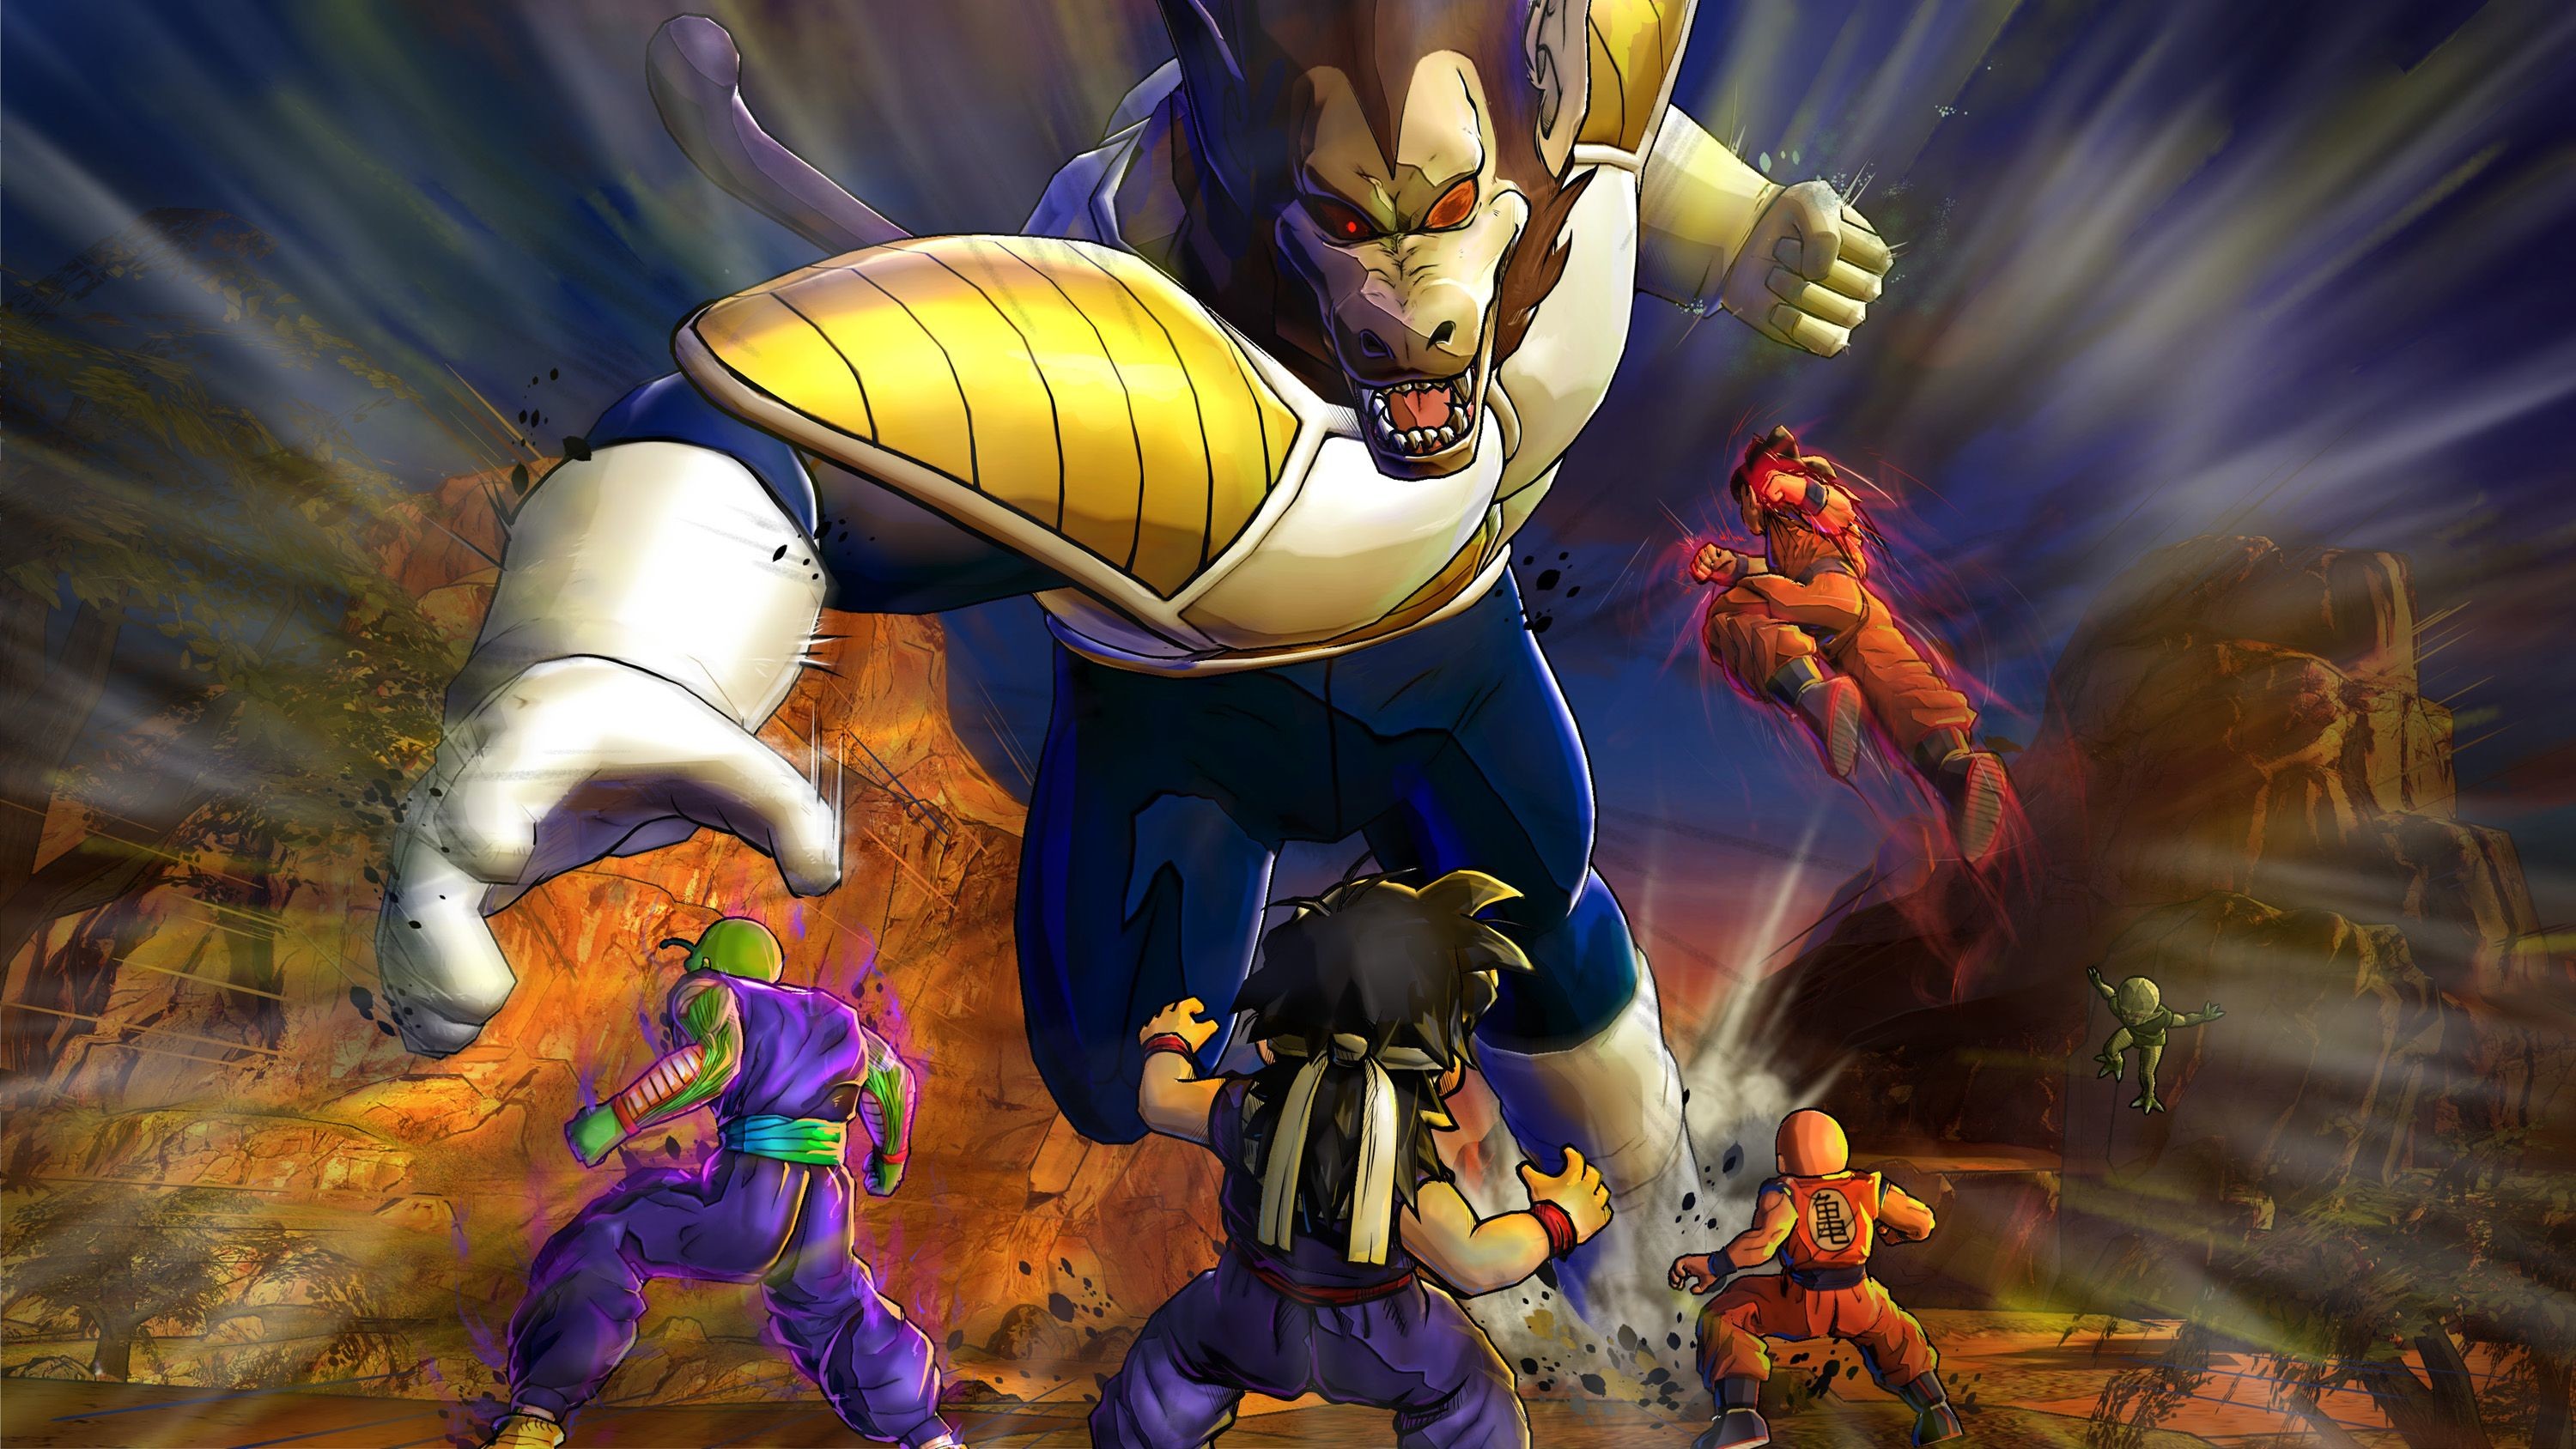 3000x1688 Dragon Ball Z Wallpaper for FB Cover - Cartoons Wallpapers